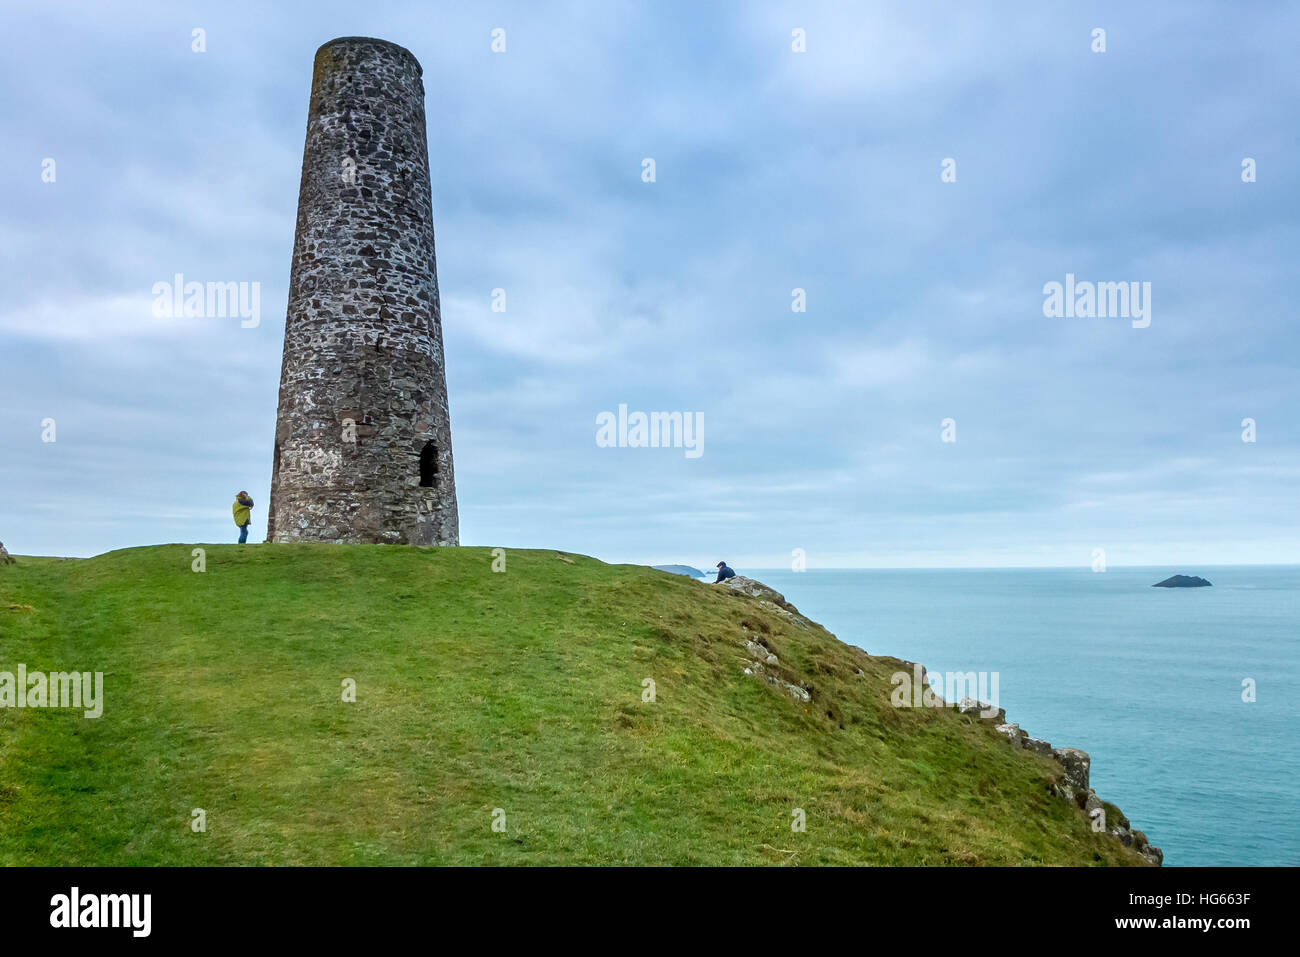 The tower at Stepper Point near Padstow in Cornwall Stock Photo - Alamy